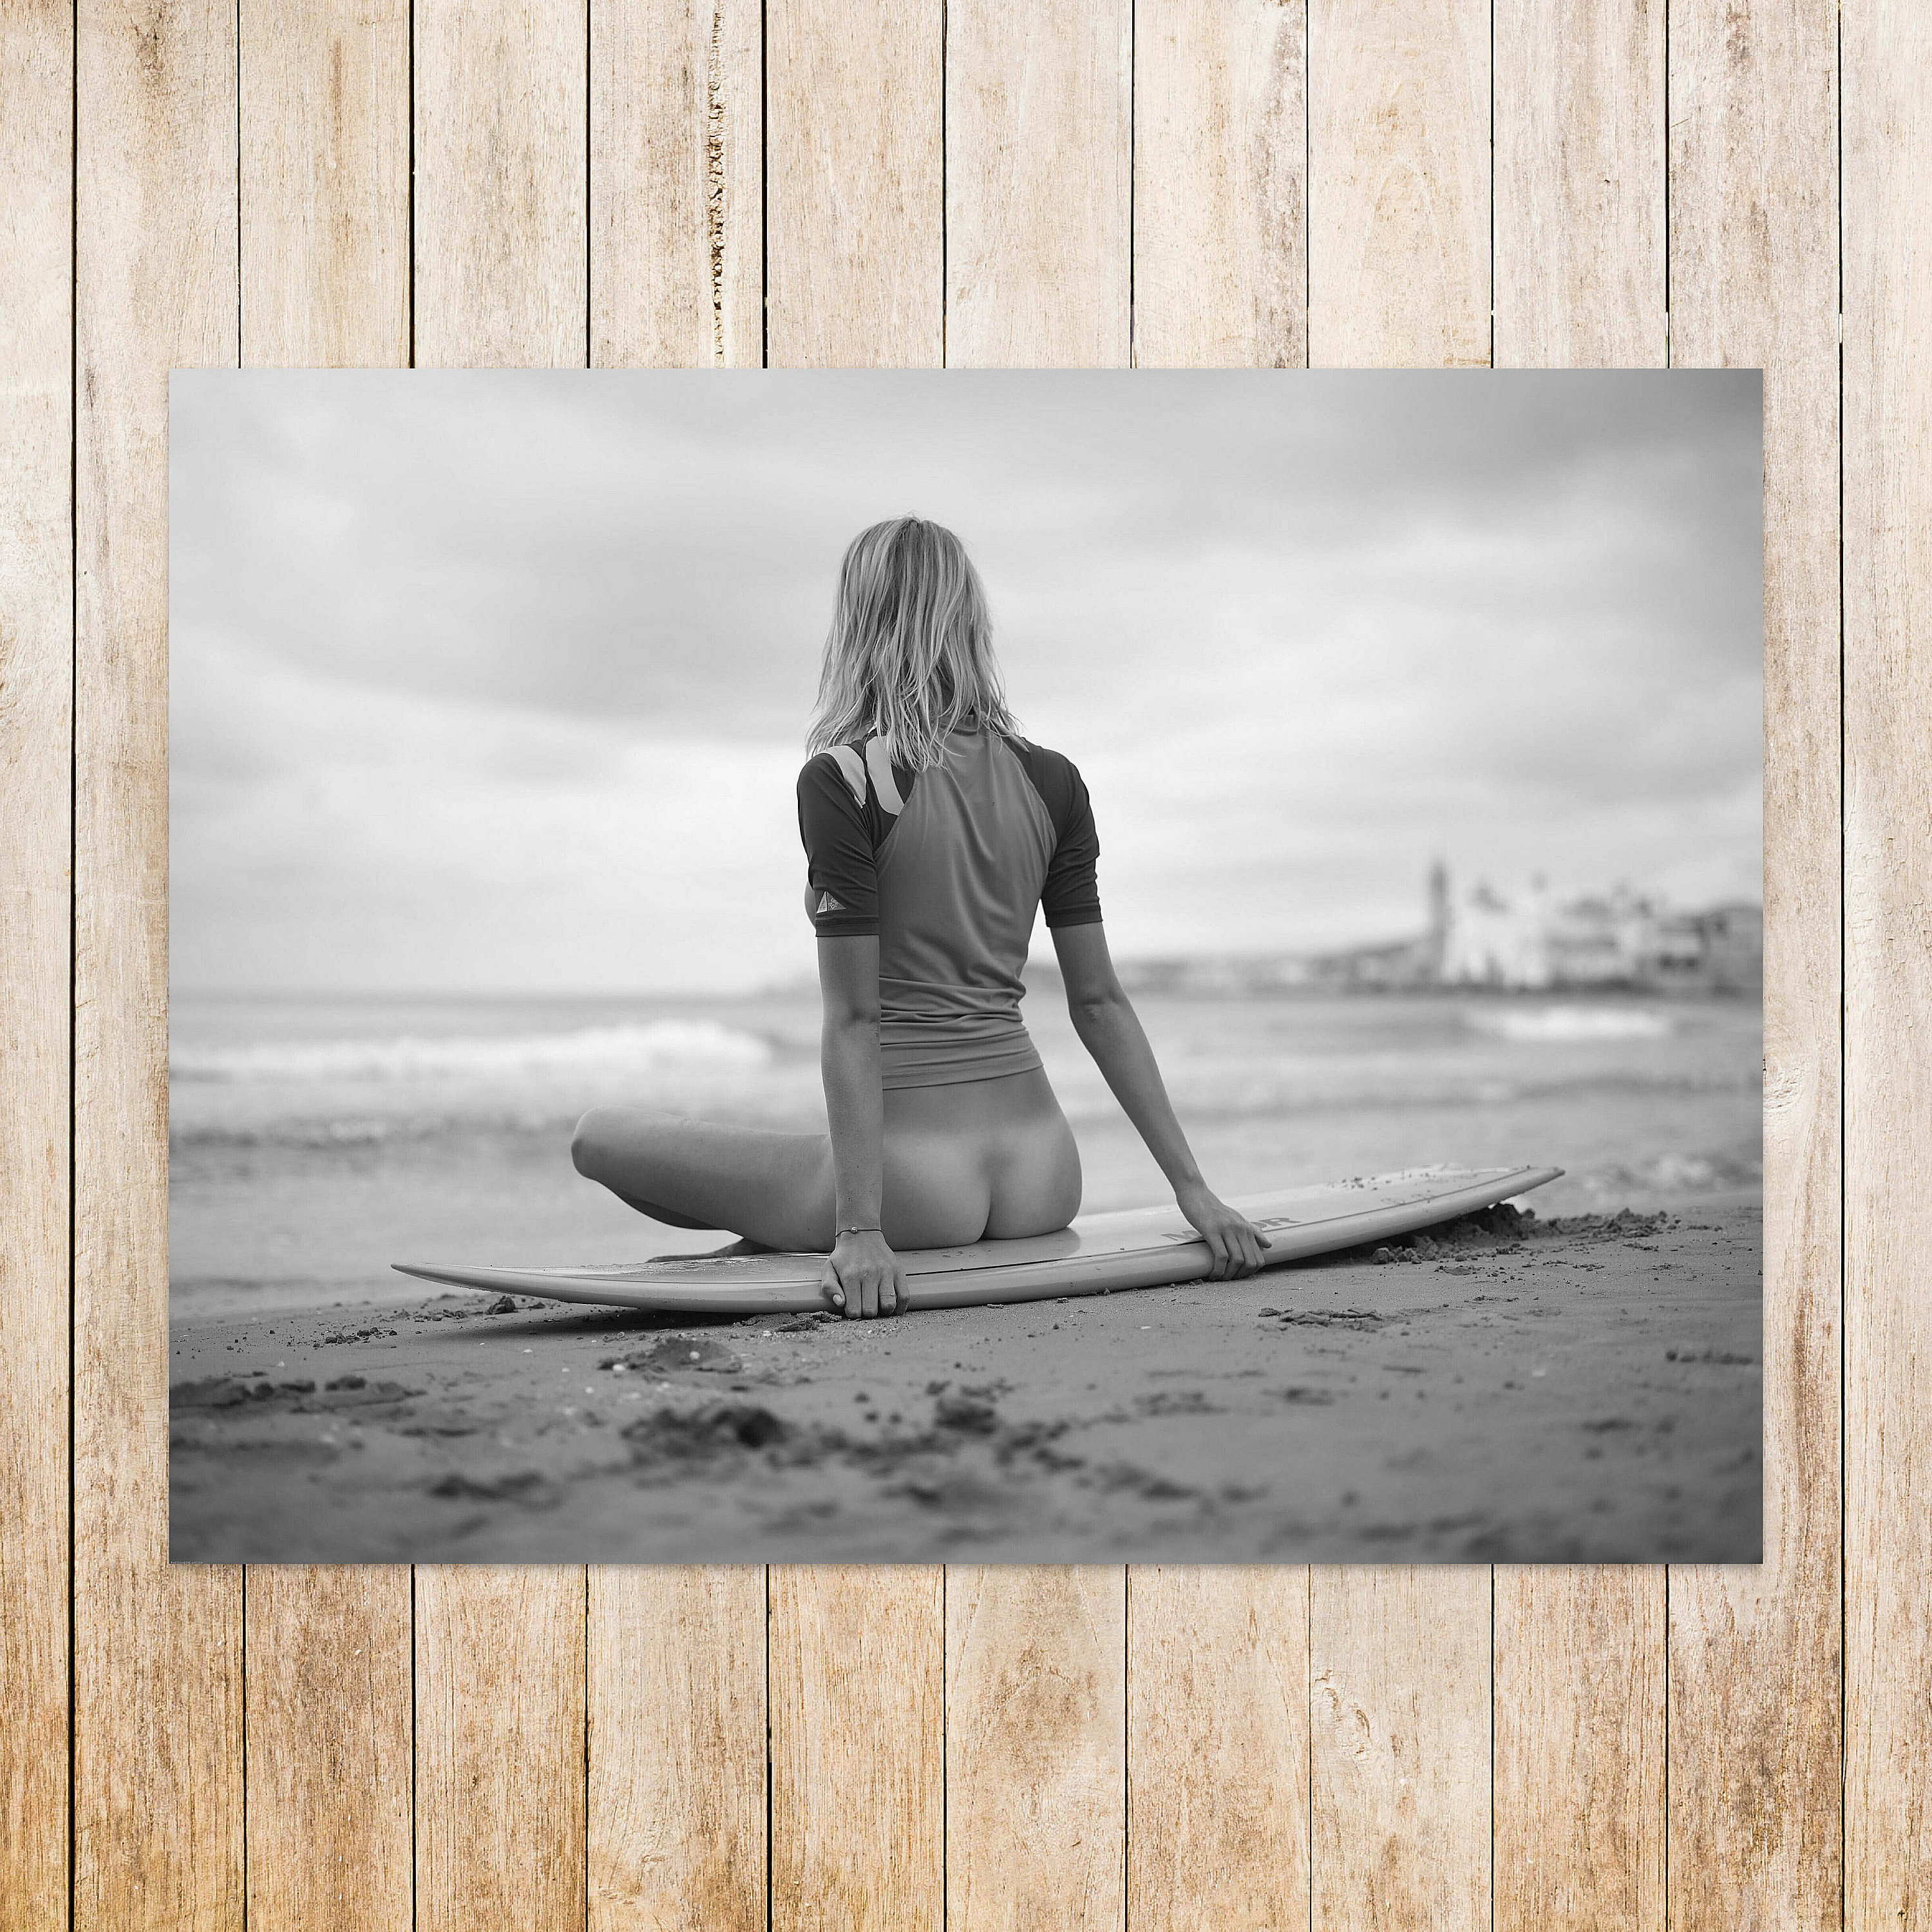 Sexy Surfer Girl photo